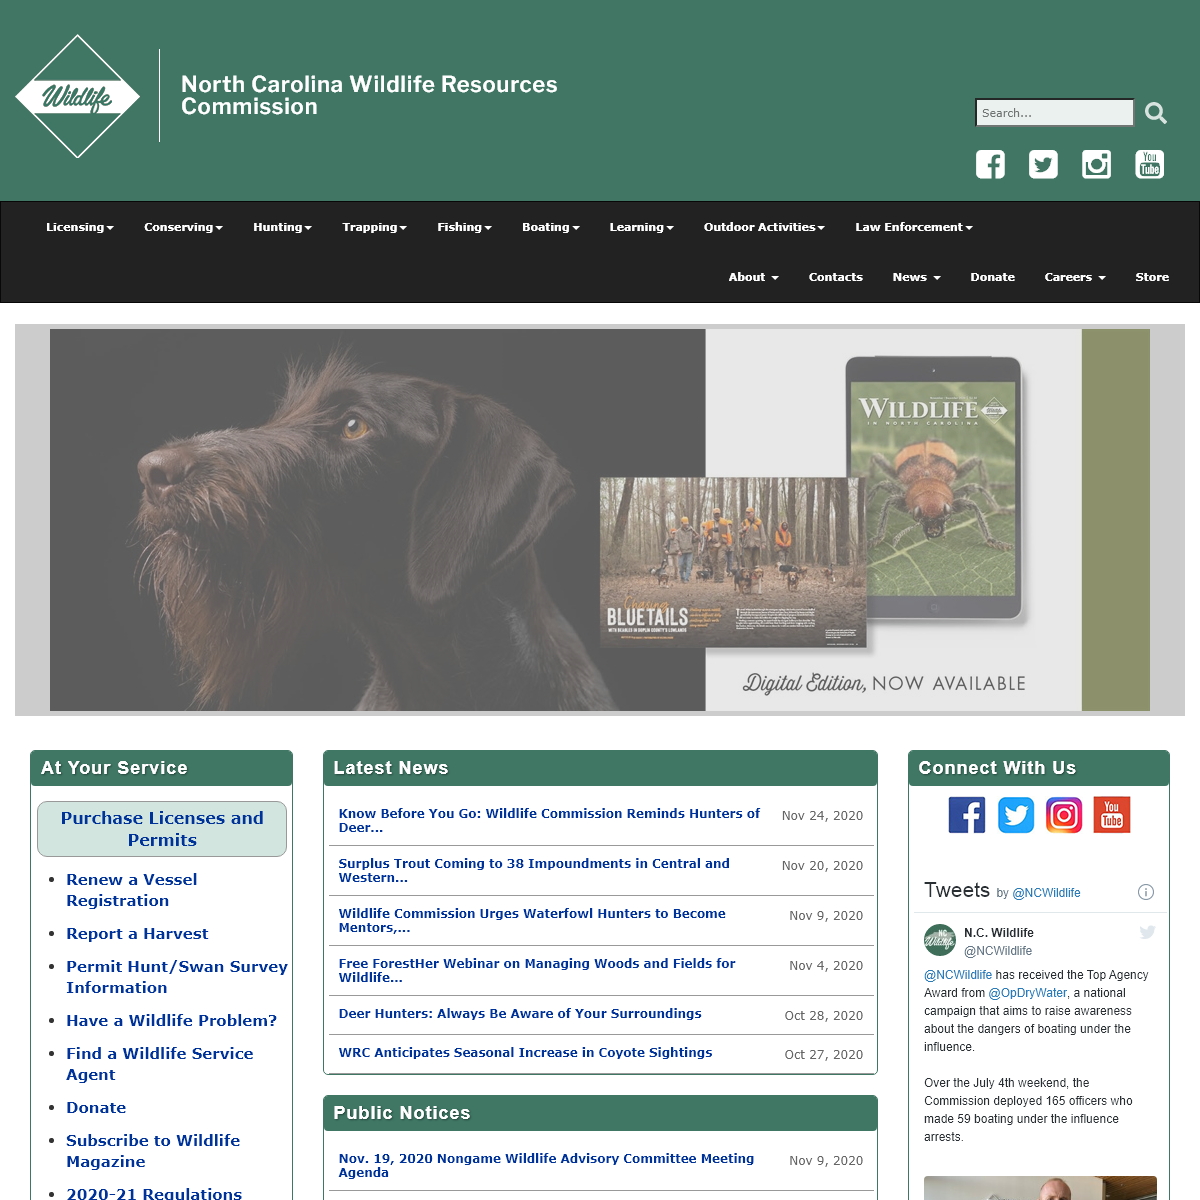 A complete backup of ncwildlife.org